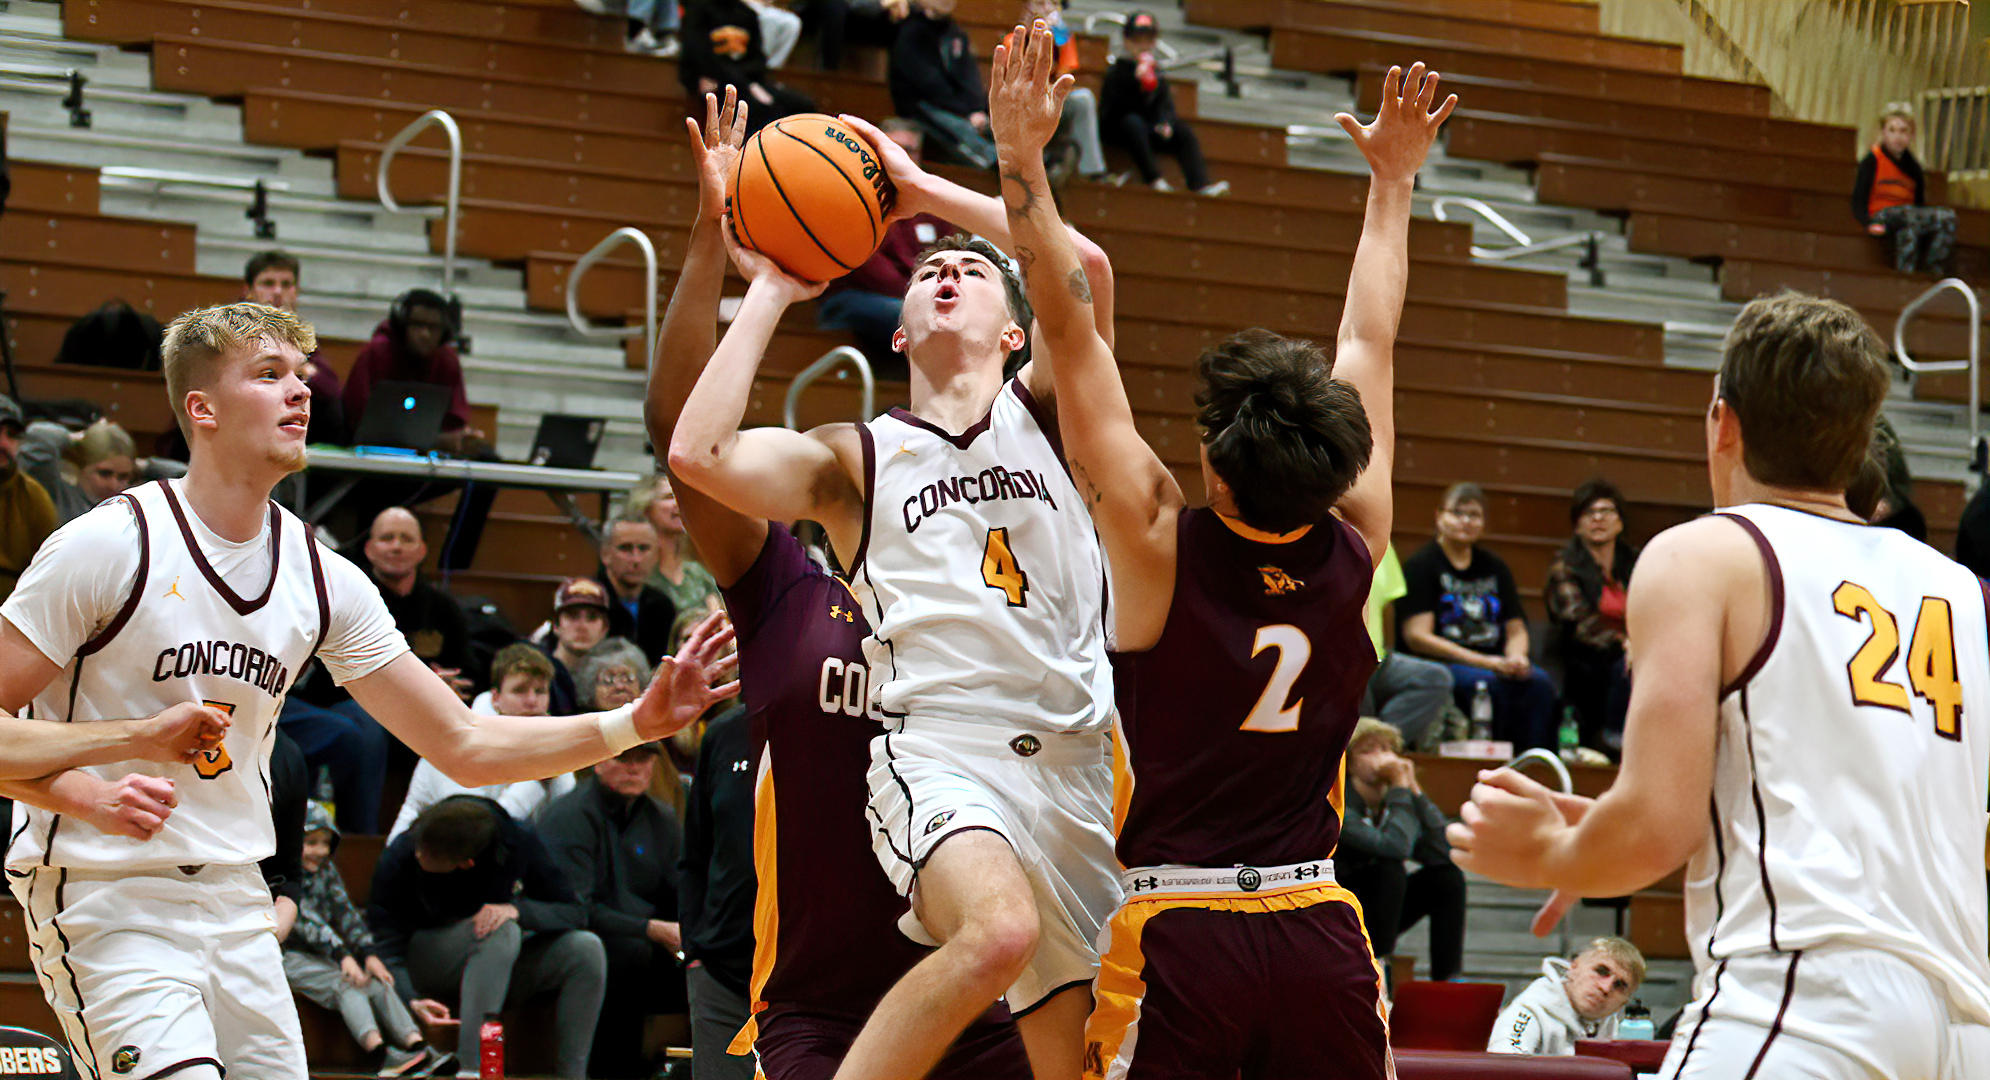 Zach Jackson drives to the hoop in the Cobbers' 27-point win over Minn.-Morris. He finished with a career-high 19 points.